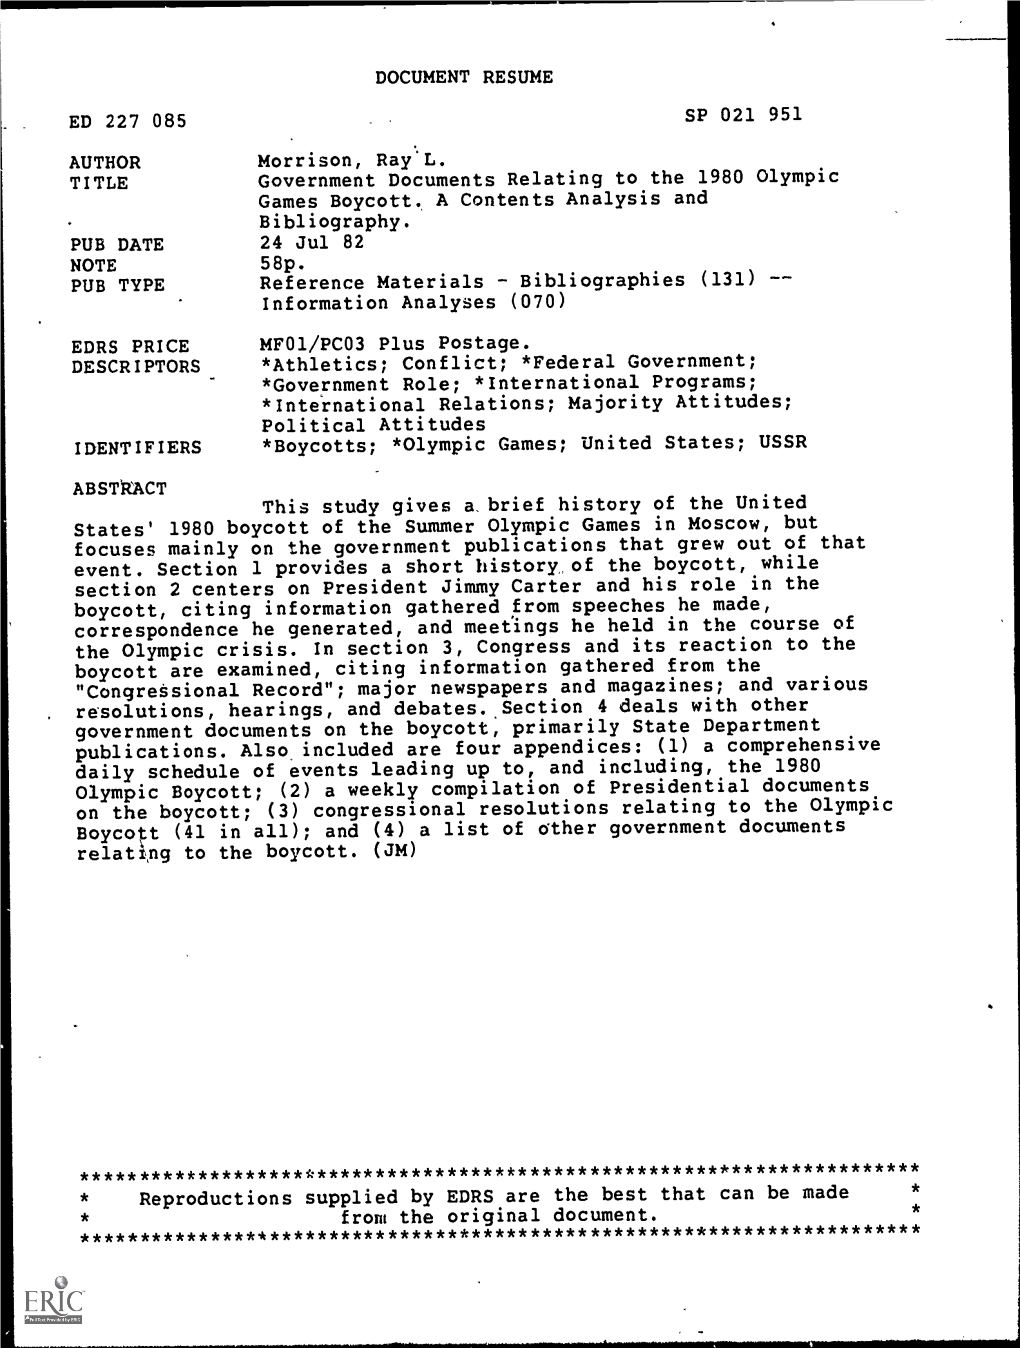 Government Documents Relating to the 1980Olympic Games Boycott. a Contents Analysis and Bibliography